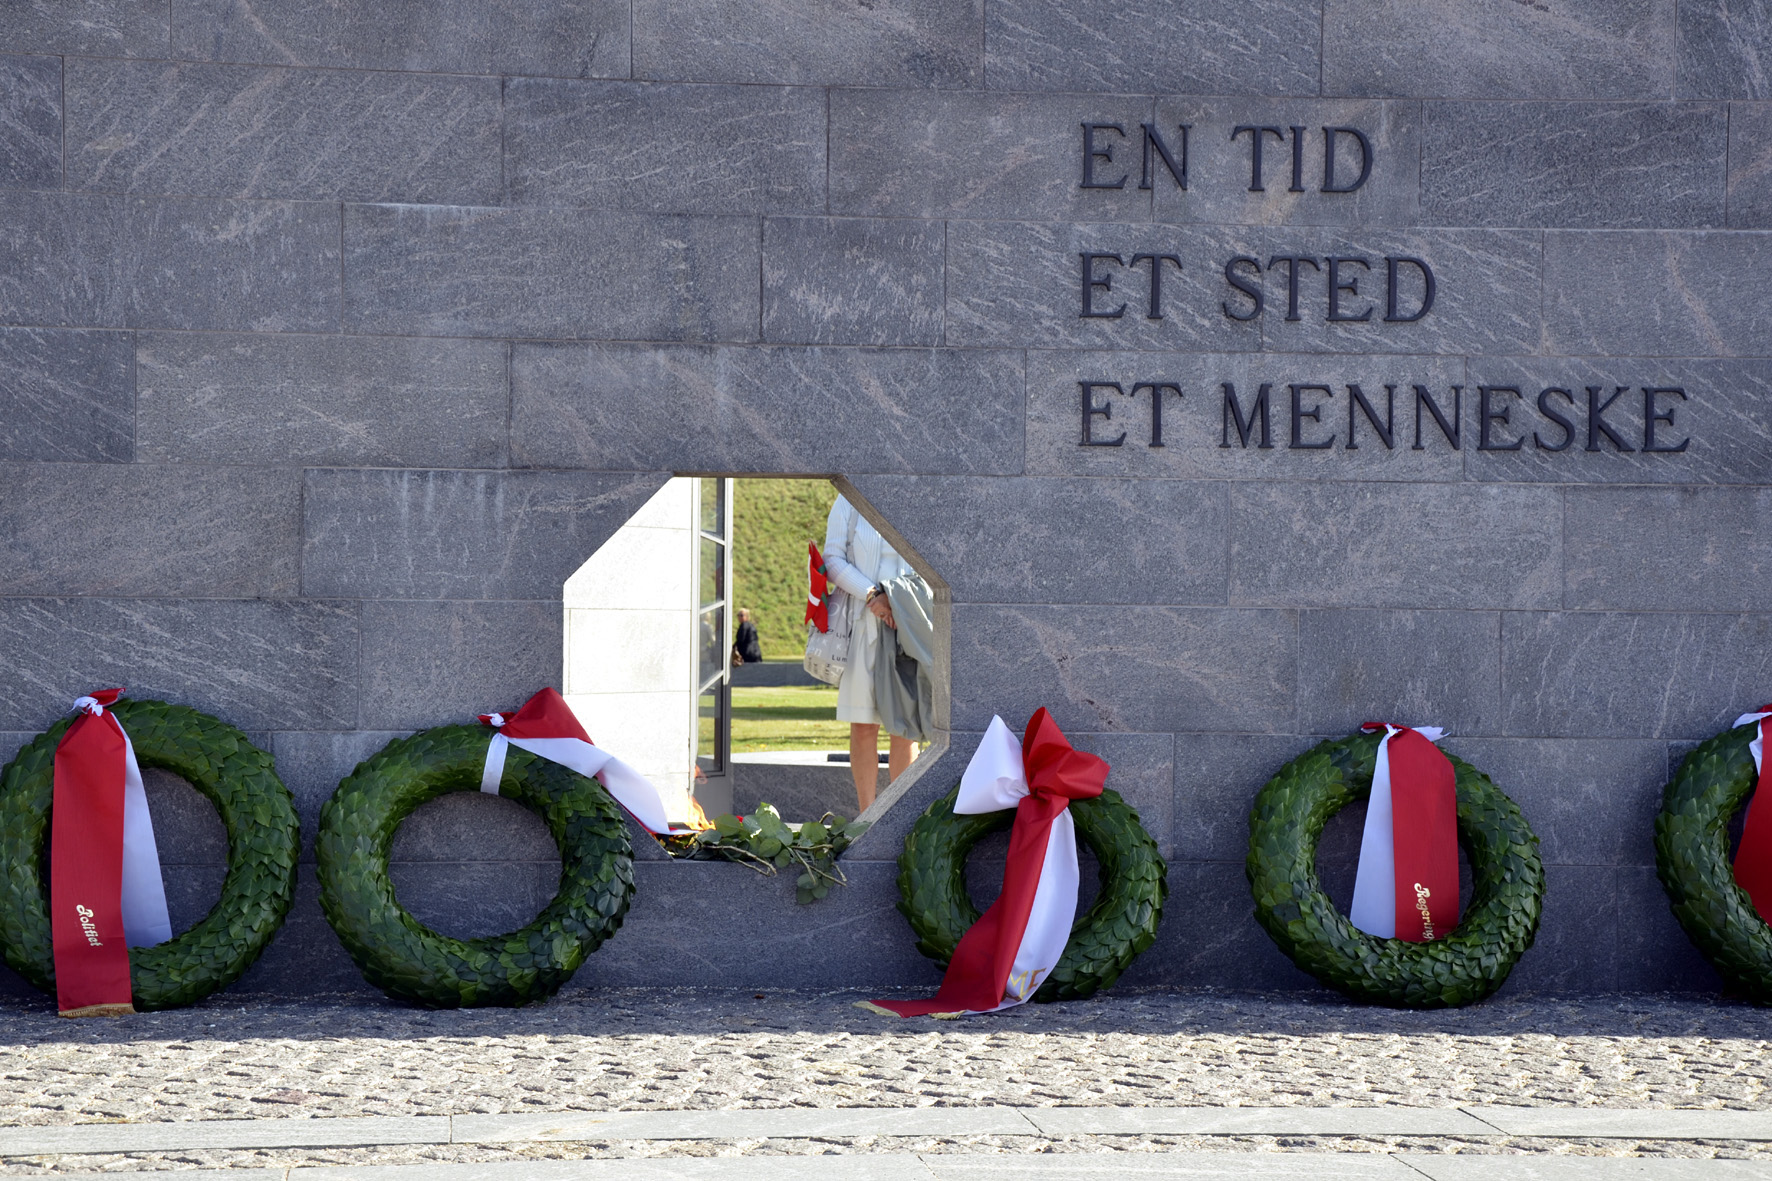 Time for reflection after the official wreath-laying ceremony at the Monument to Denmark’s International Effort since 1948, the Citadel in Copenhagen. Photo by Thomas Randrup Pedersen ©